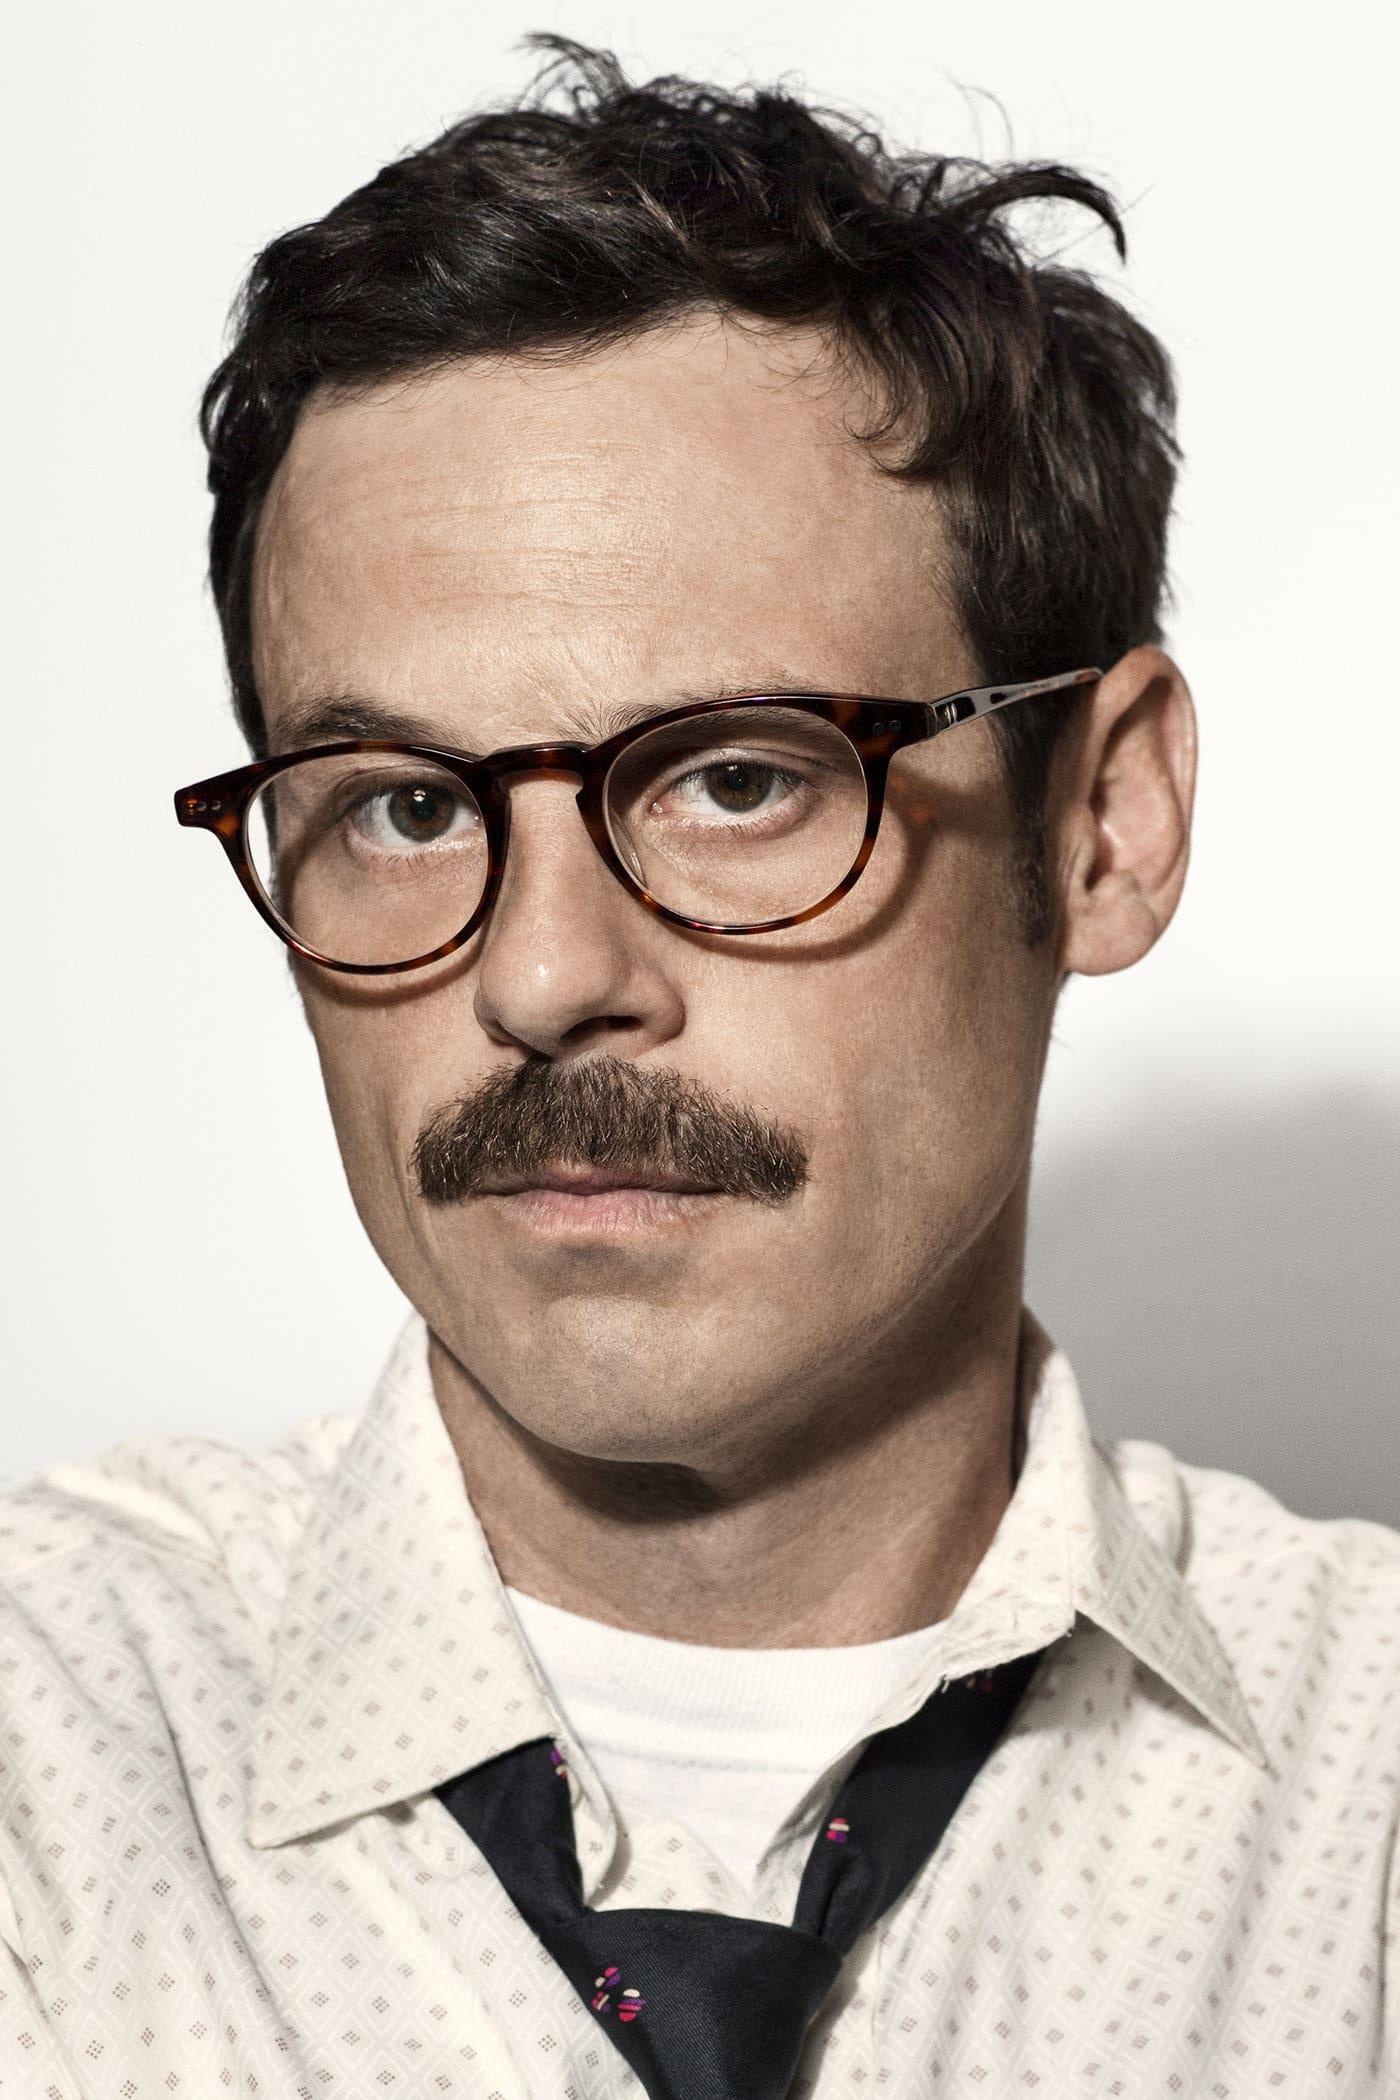 Scoot McNairy poster